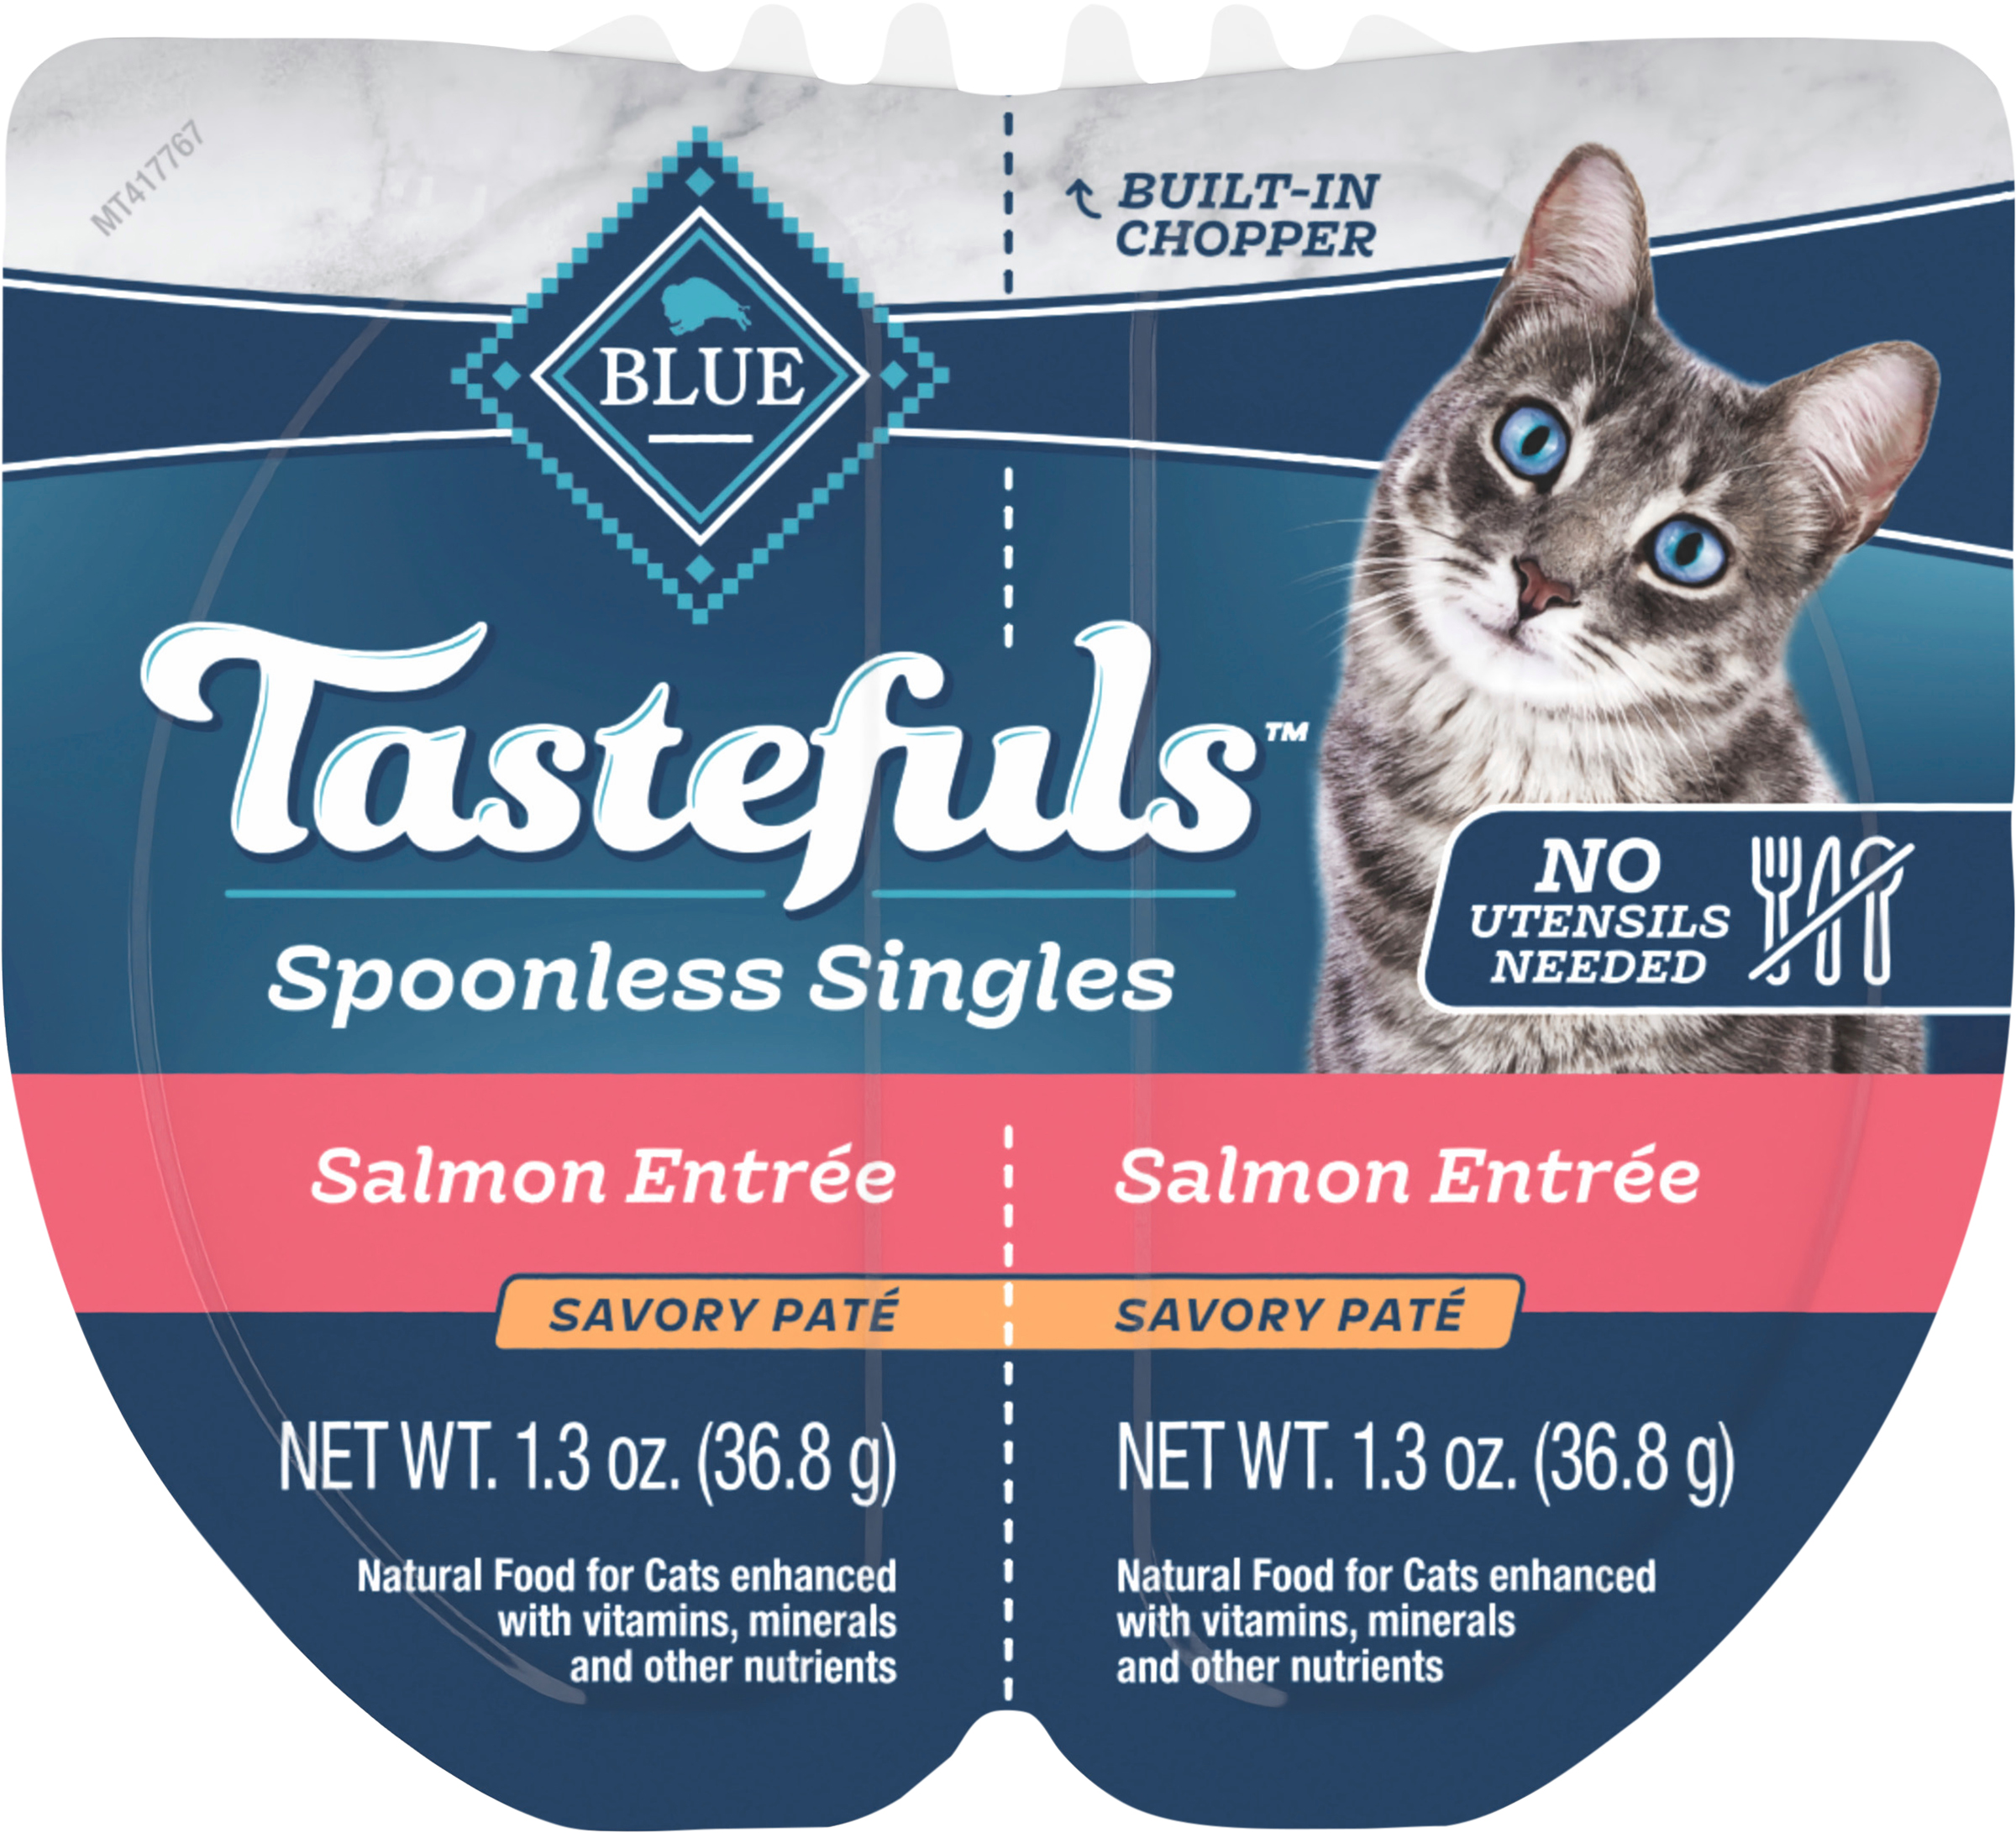 Blue Buffalo Tastefuls Spoonless Singles Adult Pate Wet Cat Food, Salmon Entrée, Perfectly Portioned Cups in a 2.6-oz Tw